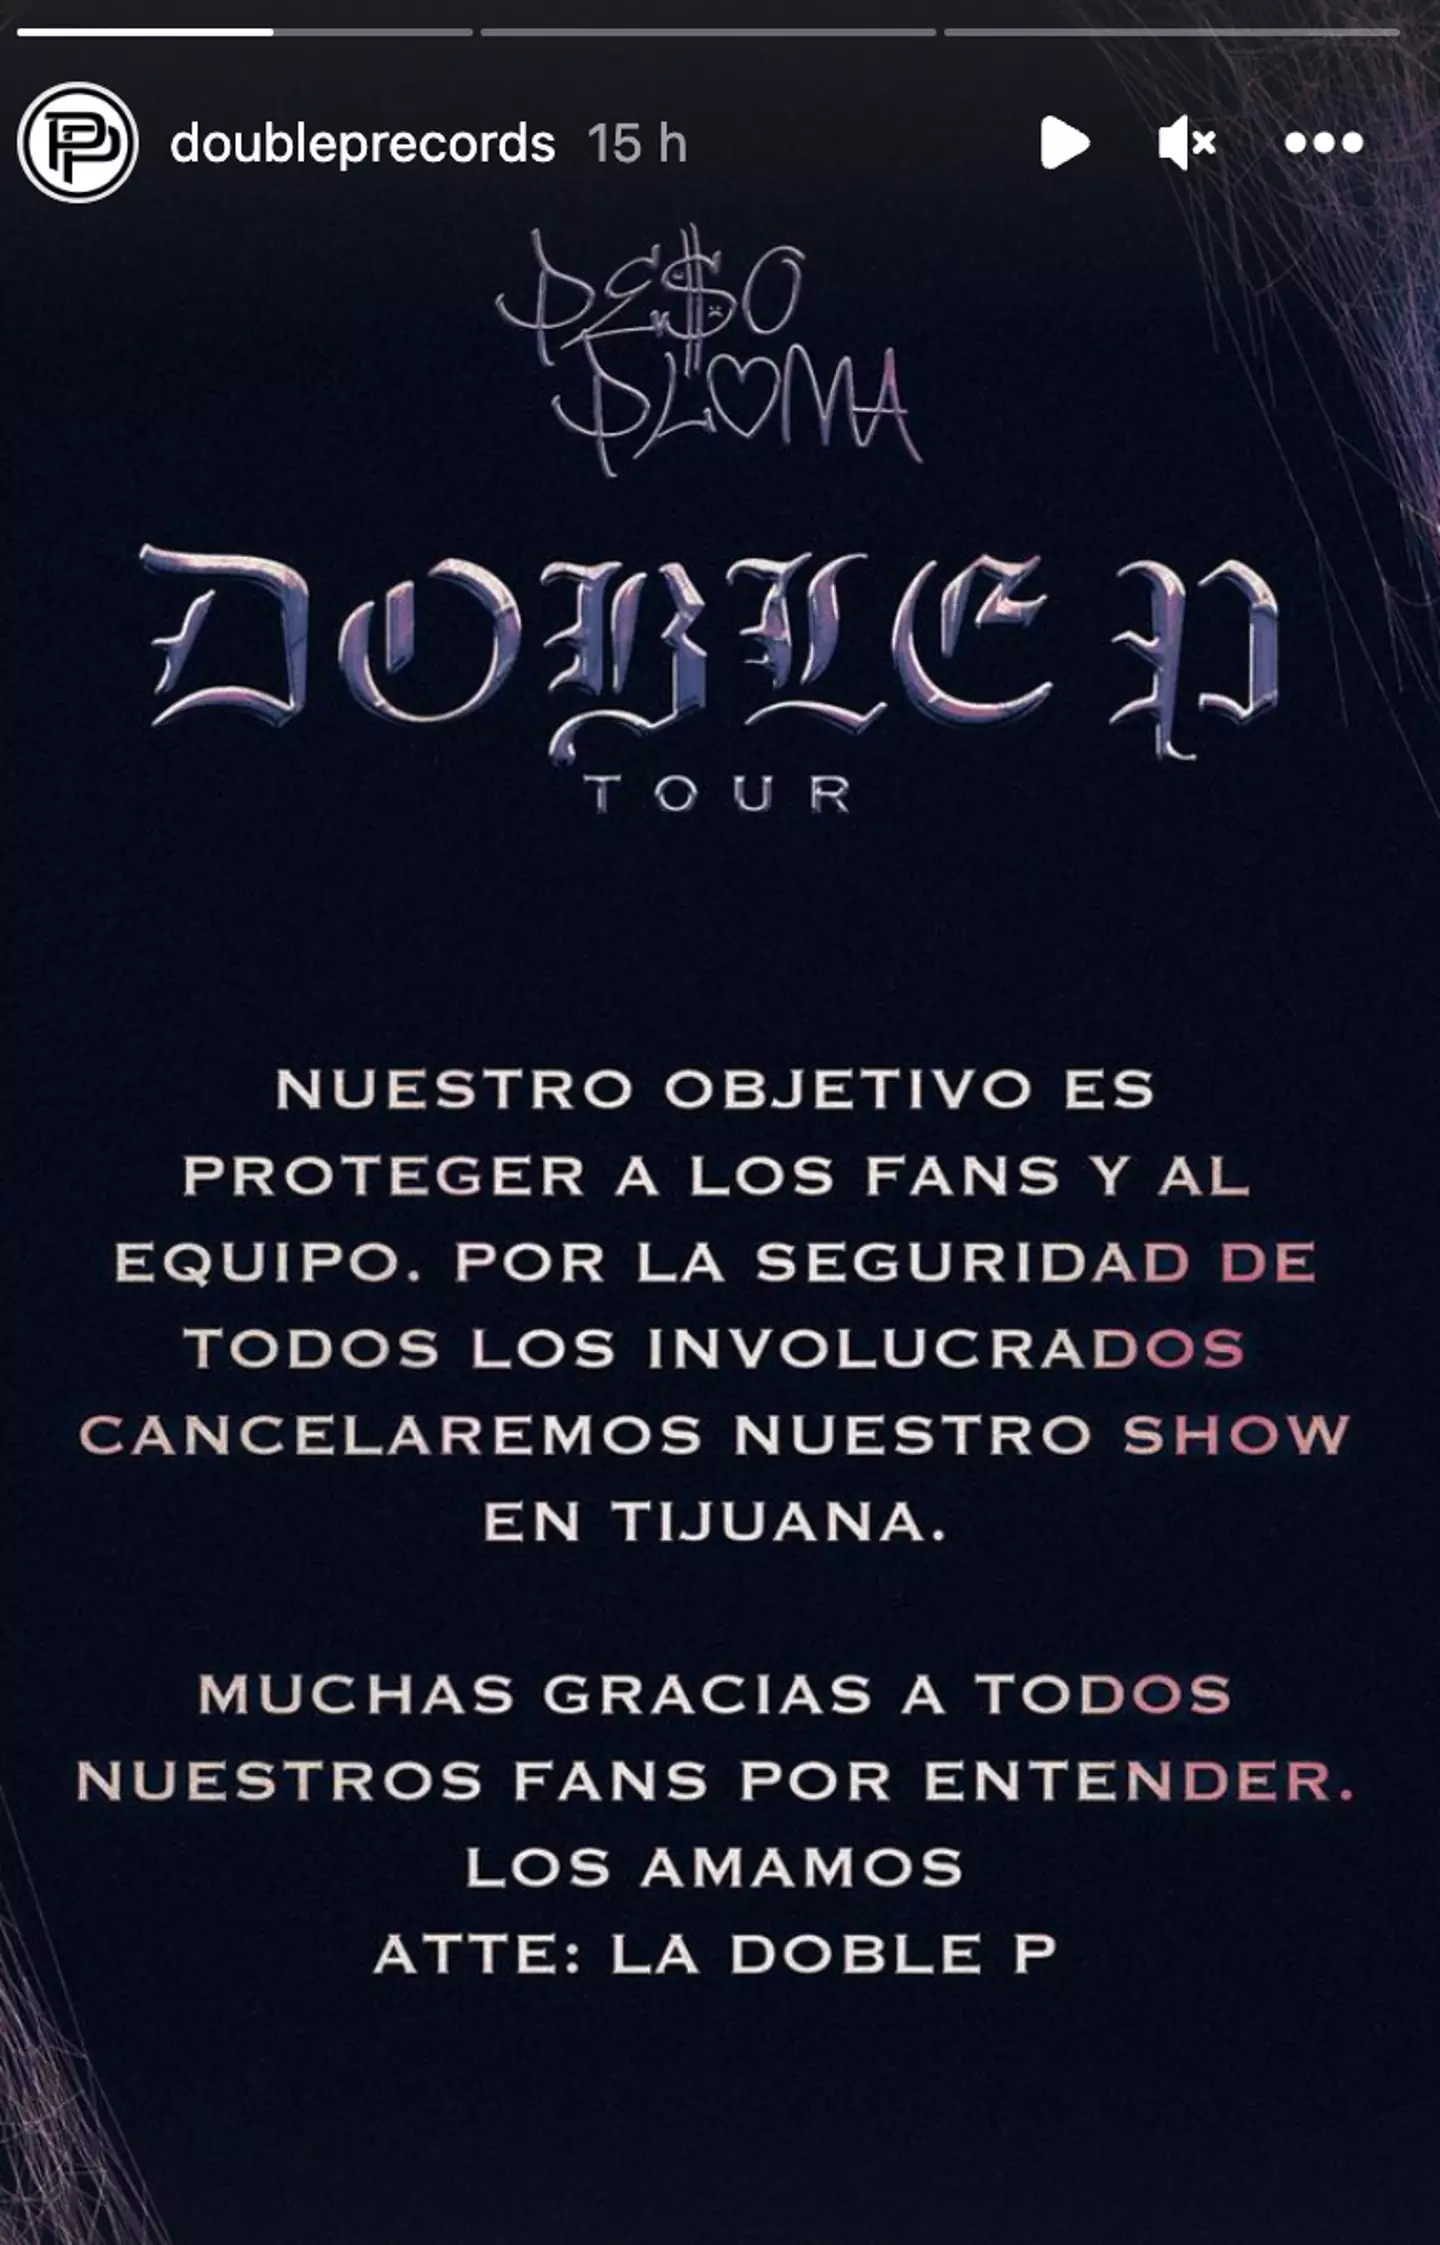 Pluma was meant to perform in Tijuana on 14 October.